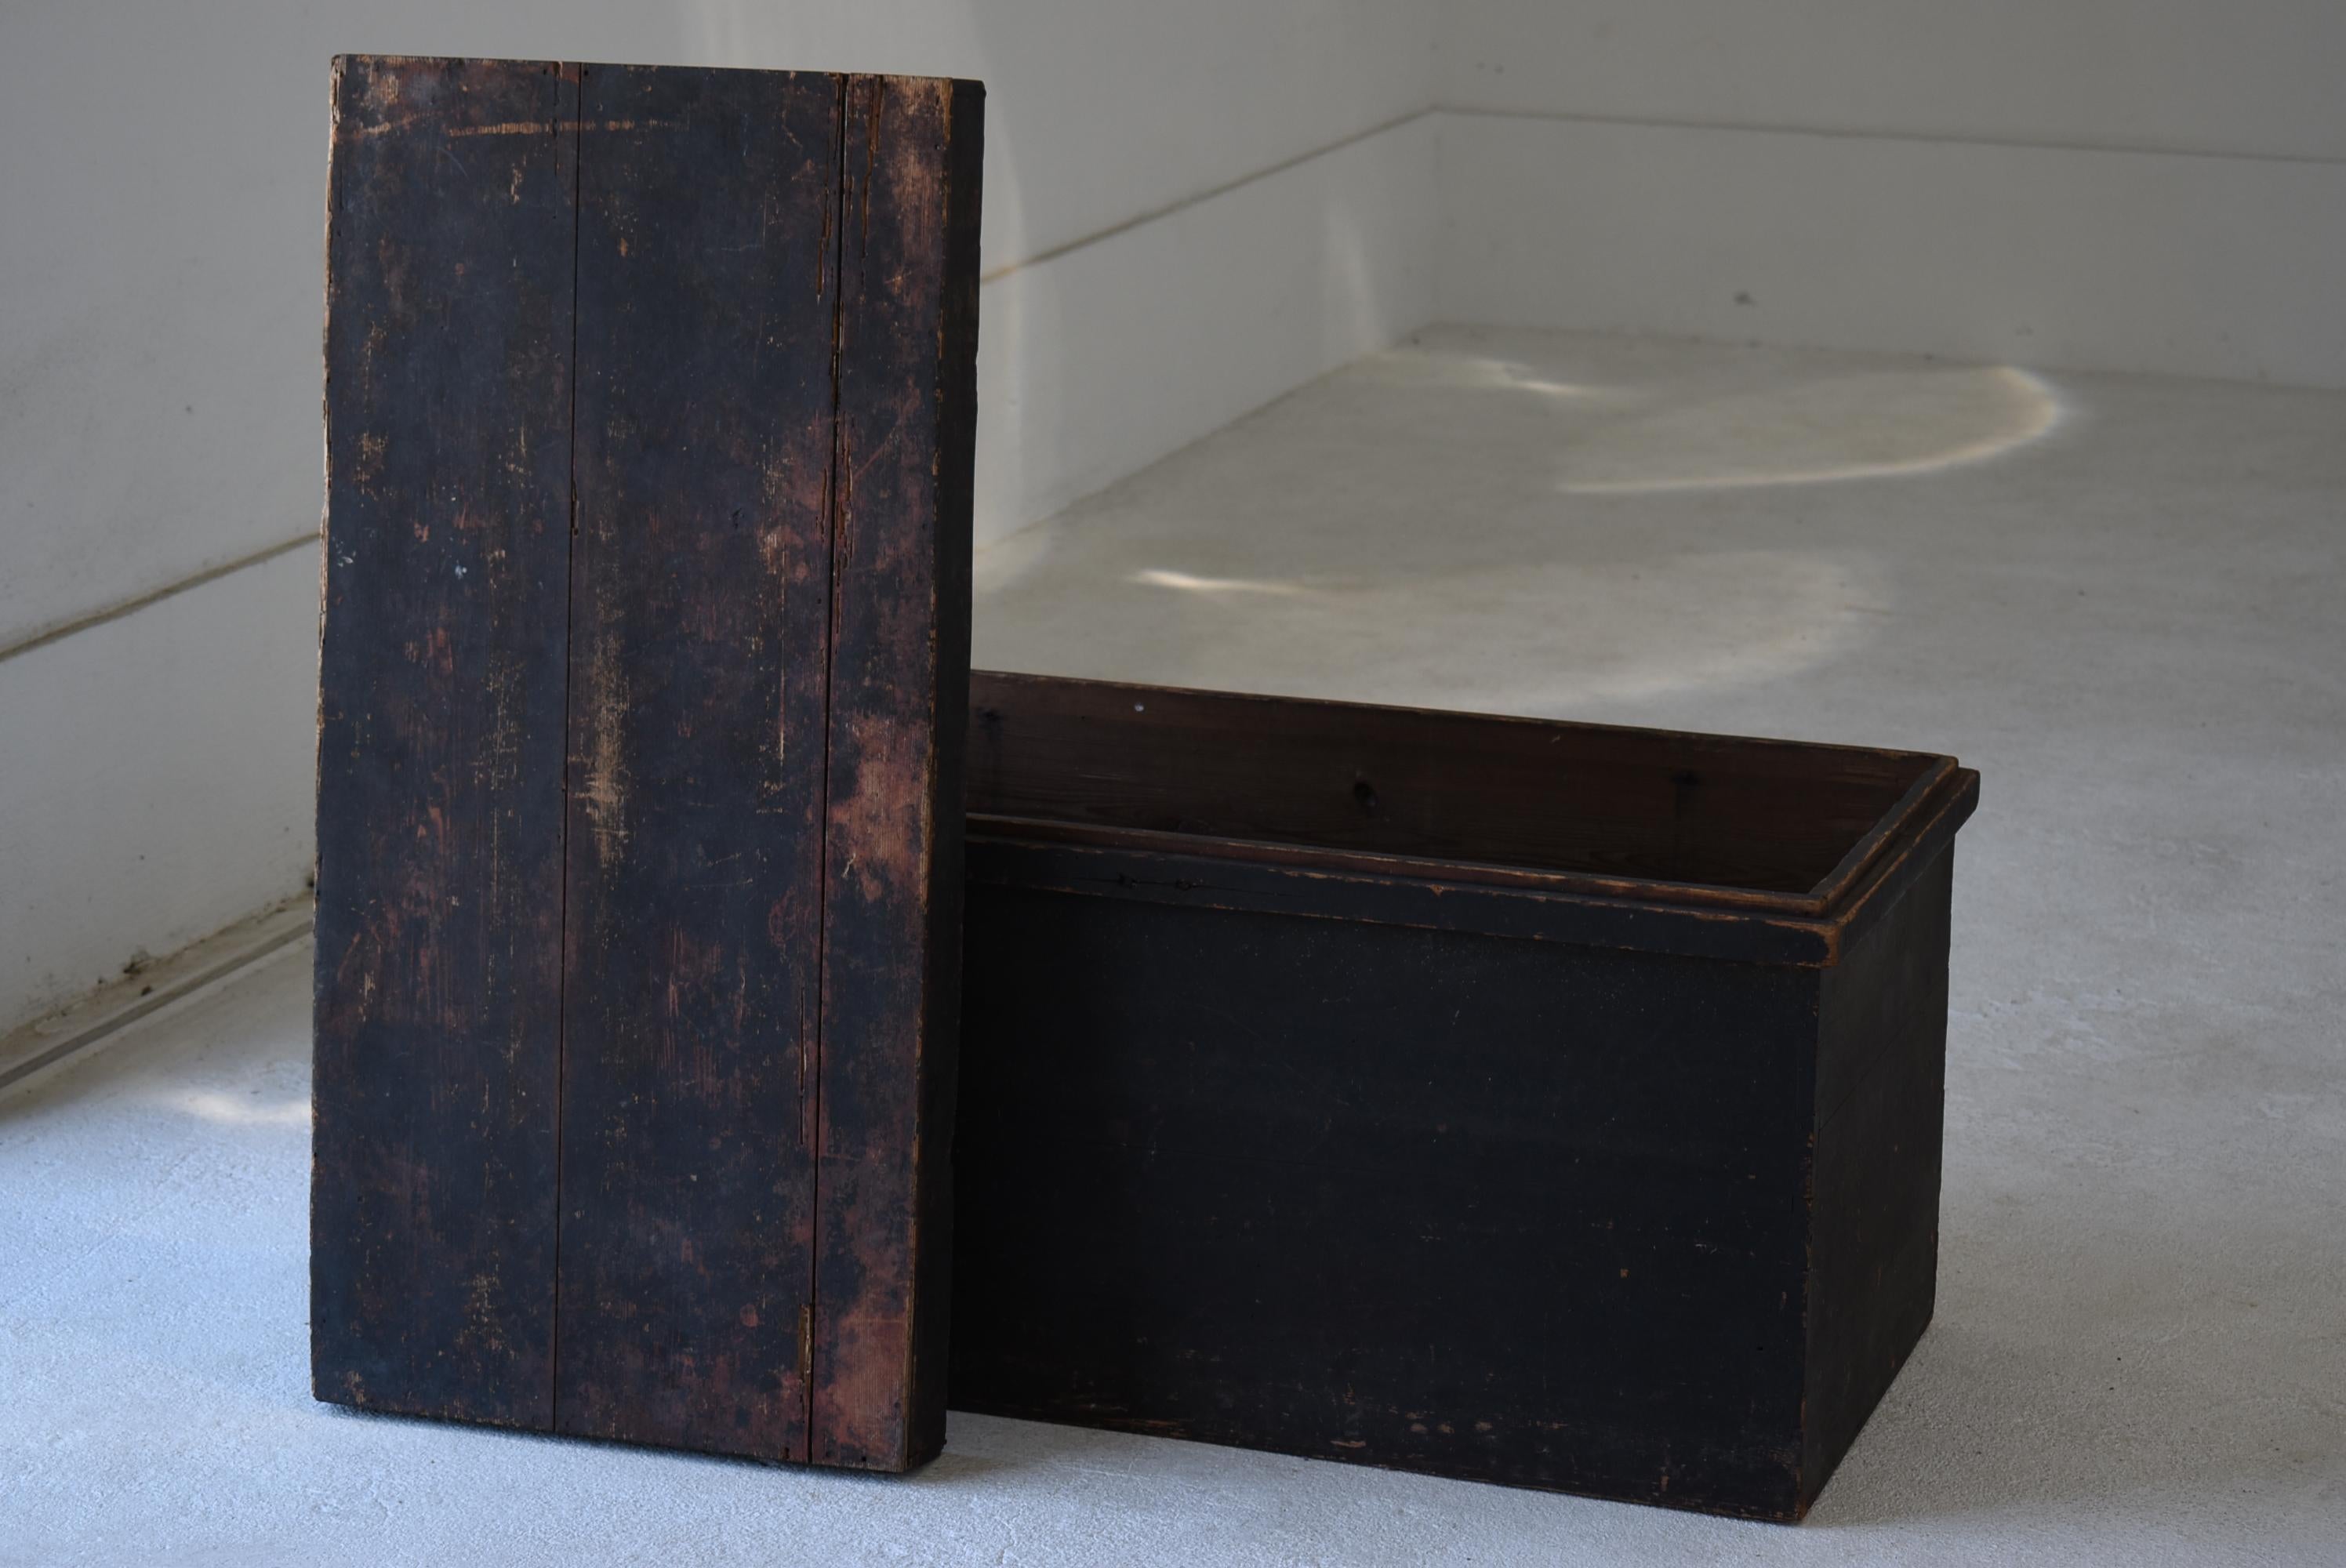 Japanese Old Wooden Box 1800-1900 / Antique Storage Side Table Coffee Table 4